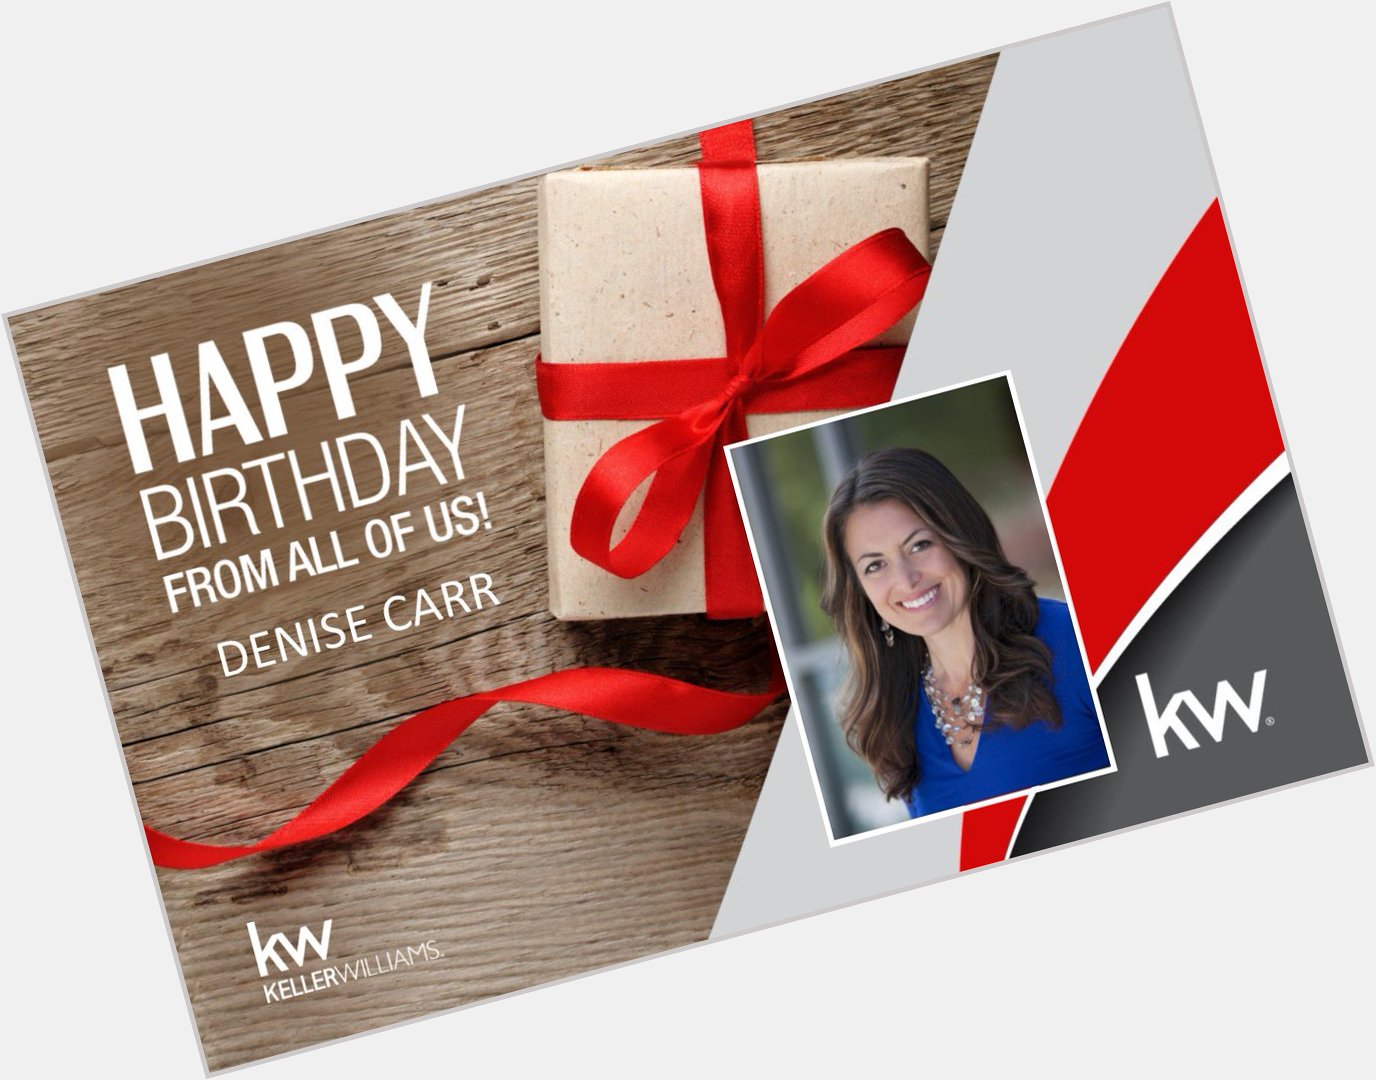 Keller Williams Bay Area Estates would like to wish DENISE CARR a very Happy Birthday!! 